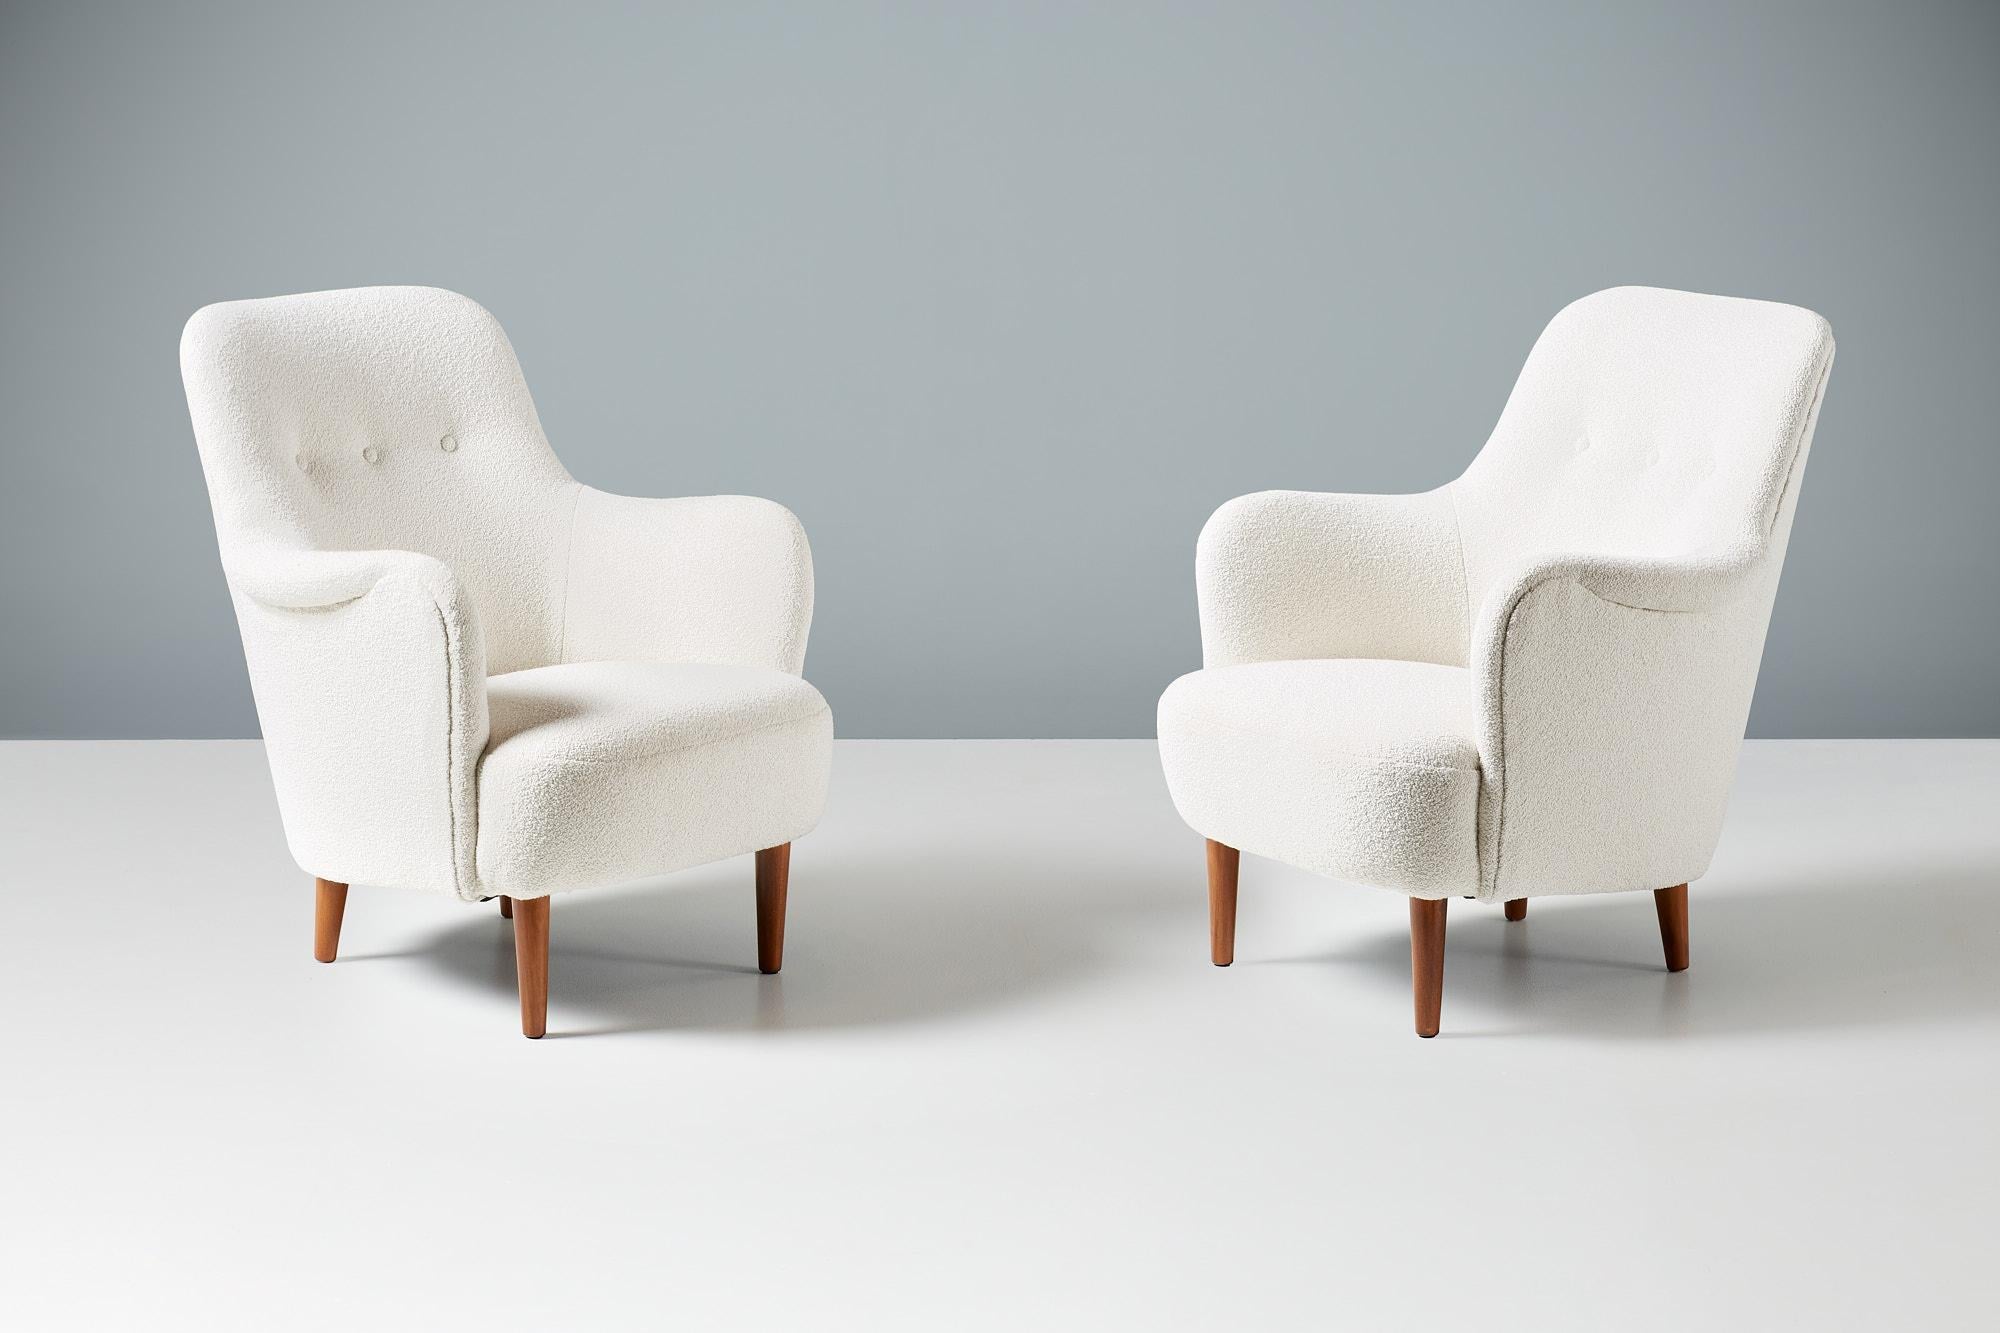 Carl Malmsten Samsas Lounge chairs, 1950s
Produced in the 1950s by O H Sjögren in Sweden, the 'Samsas' lounge chair is one of Swedish master Carl Malmsten's finest works. These examples of the chairs have been reupholstered in luxurious bouclé